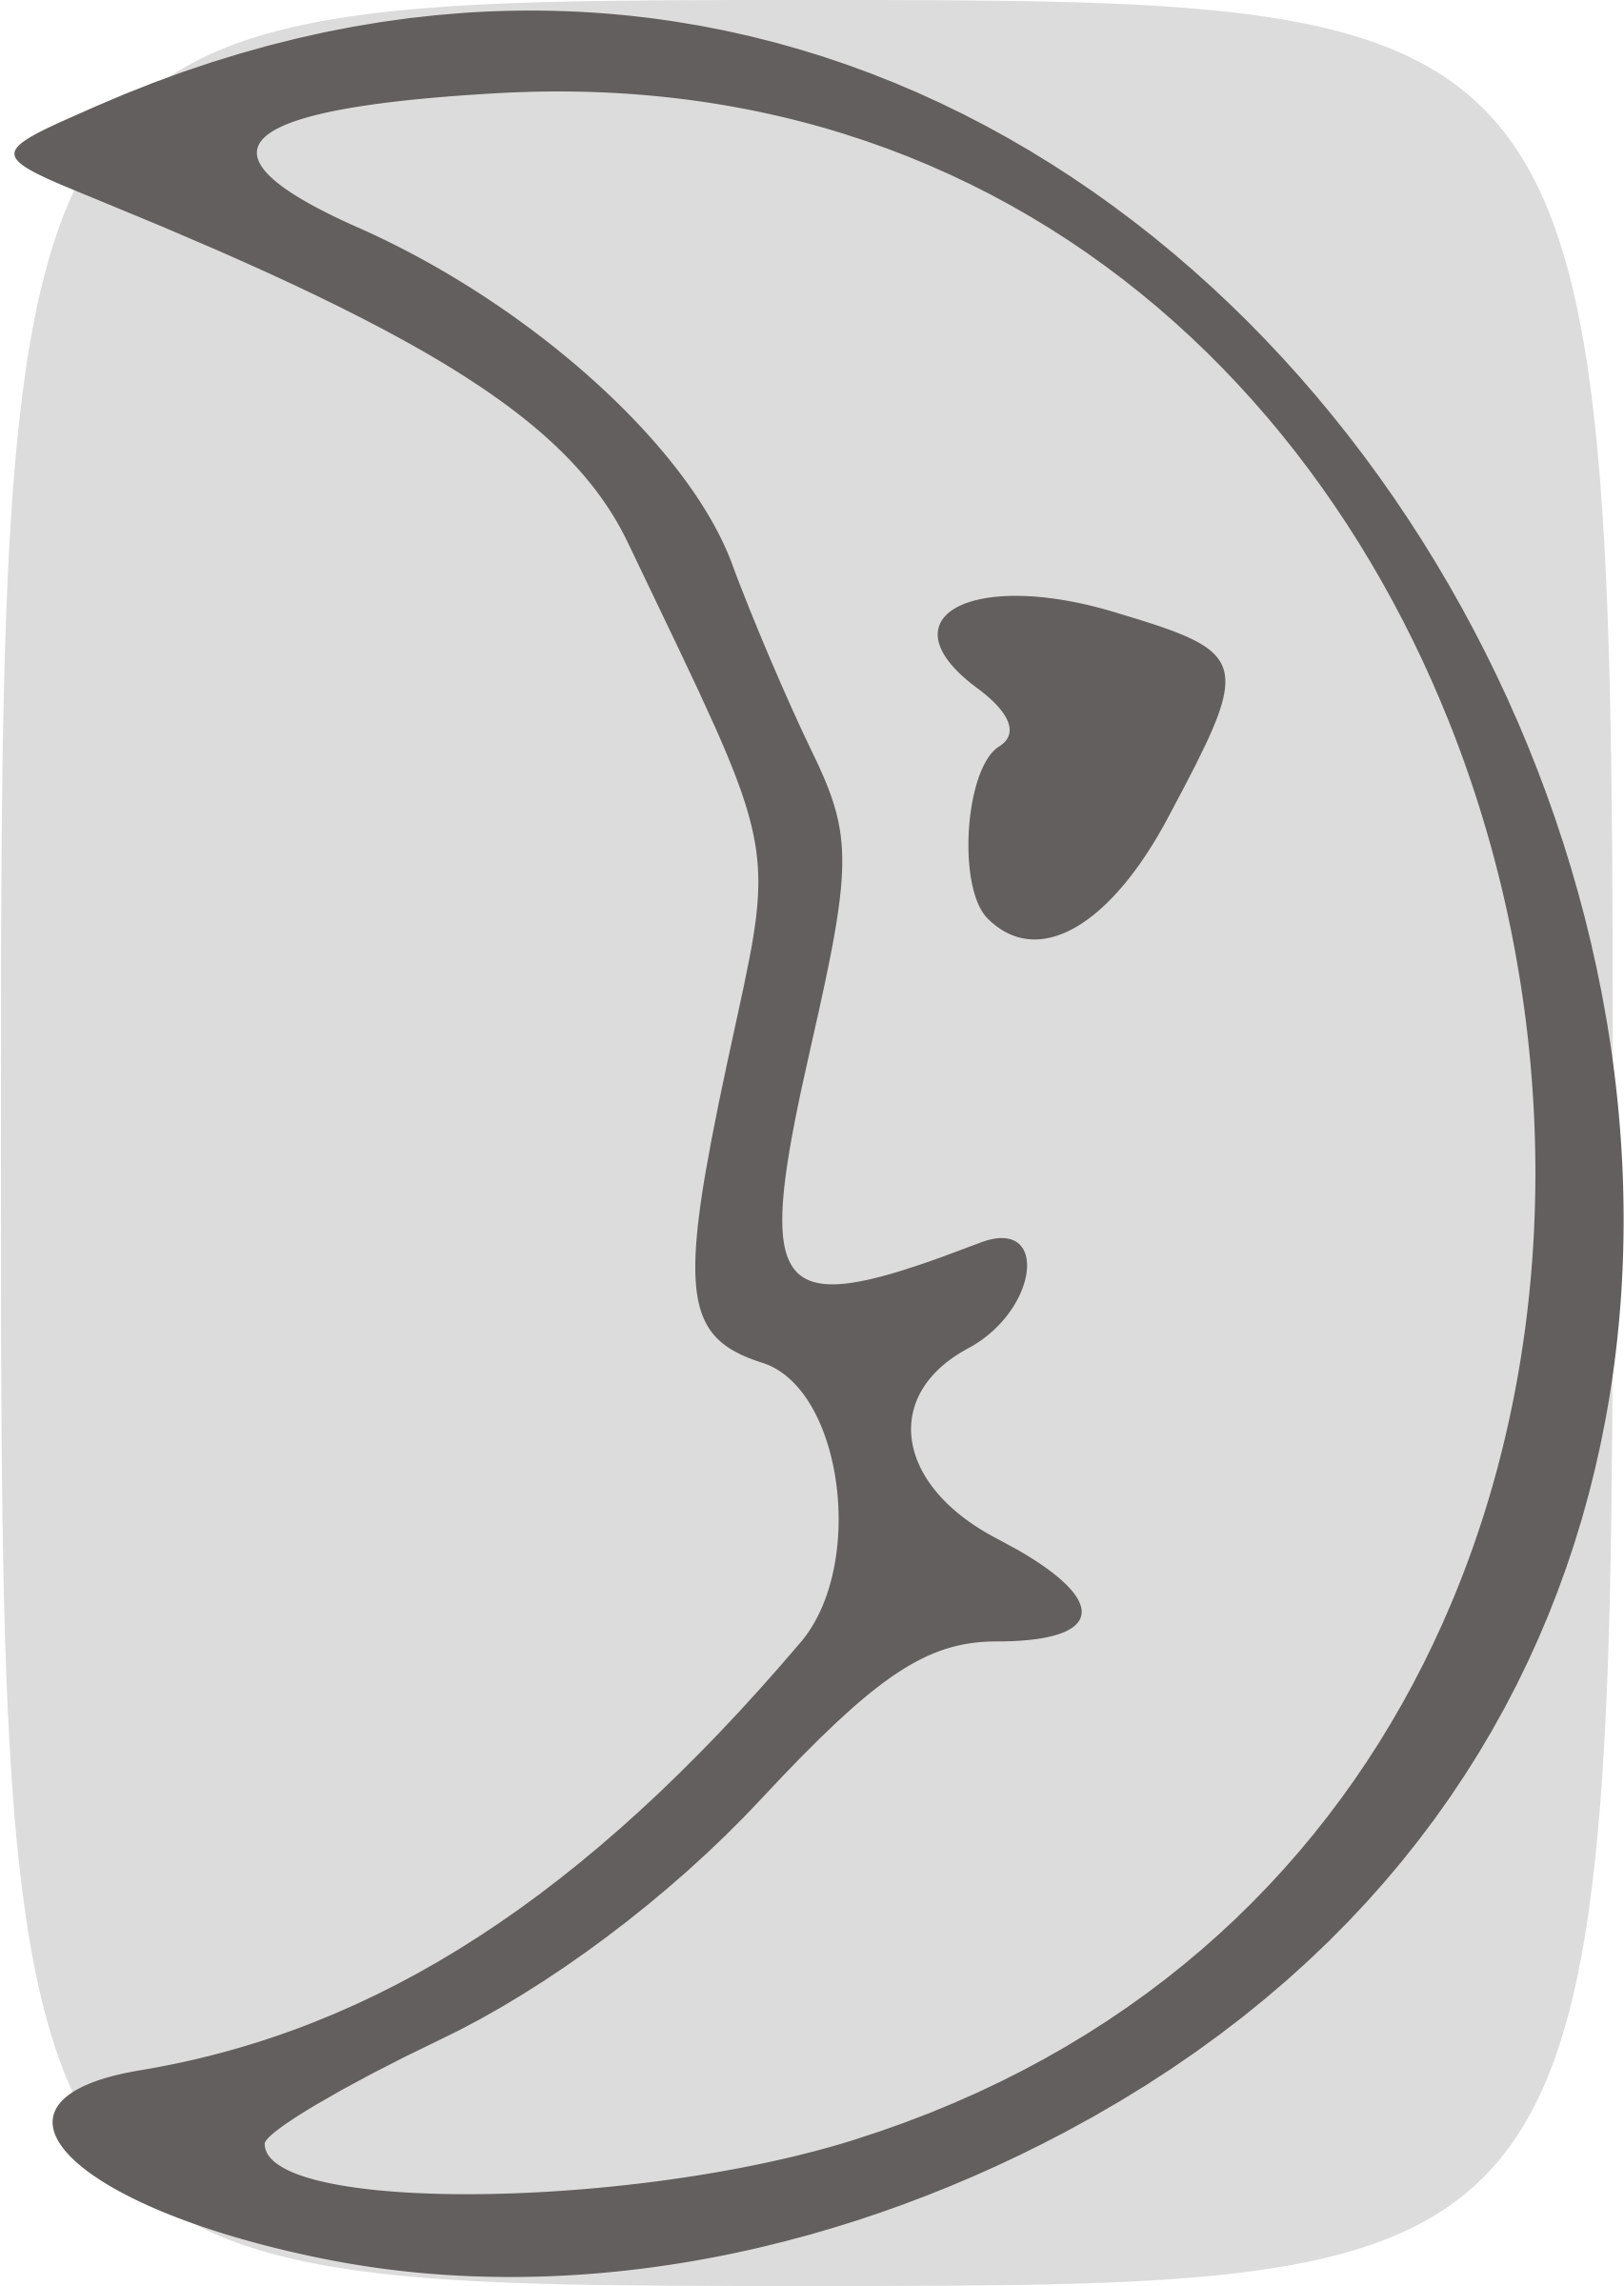 Moon Face By Global Quiz